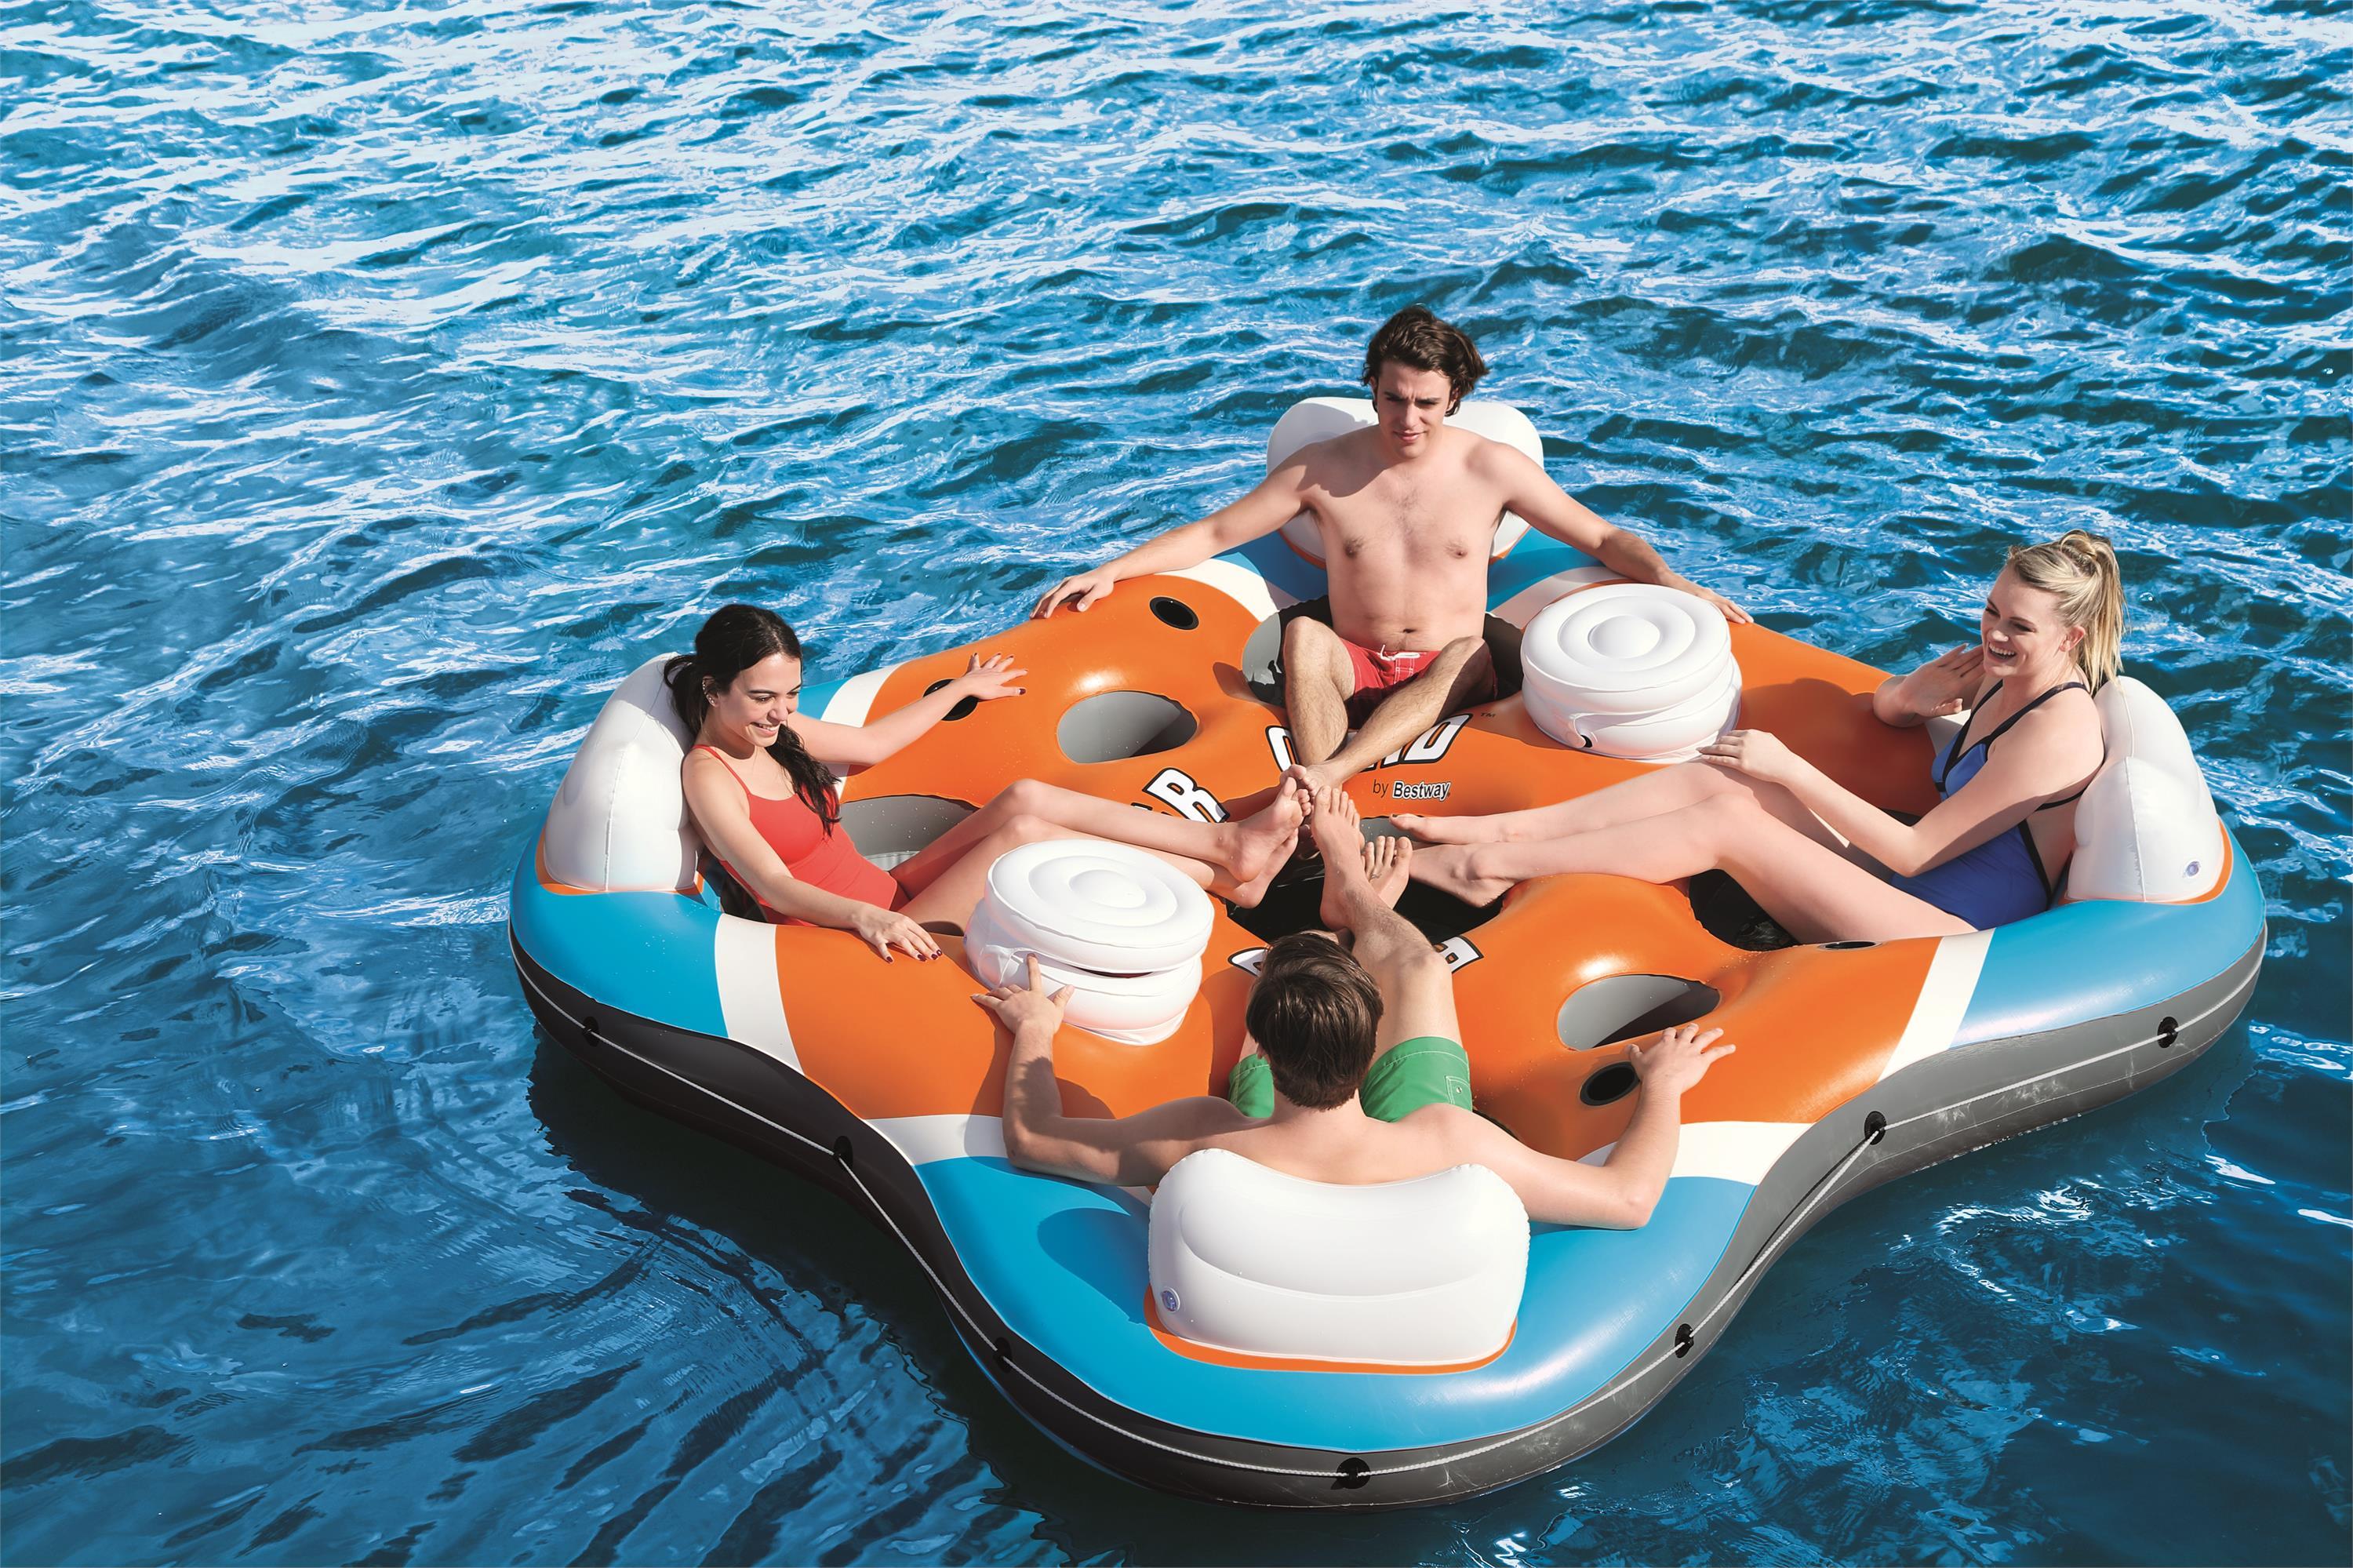 Four-person floating island